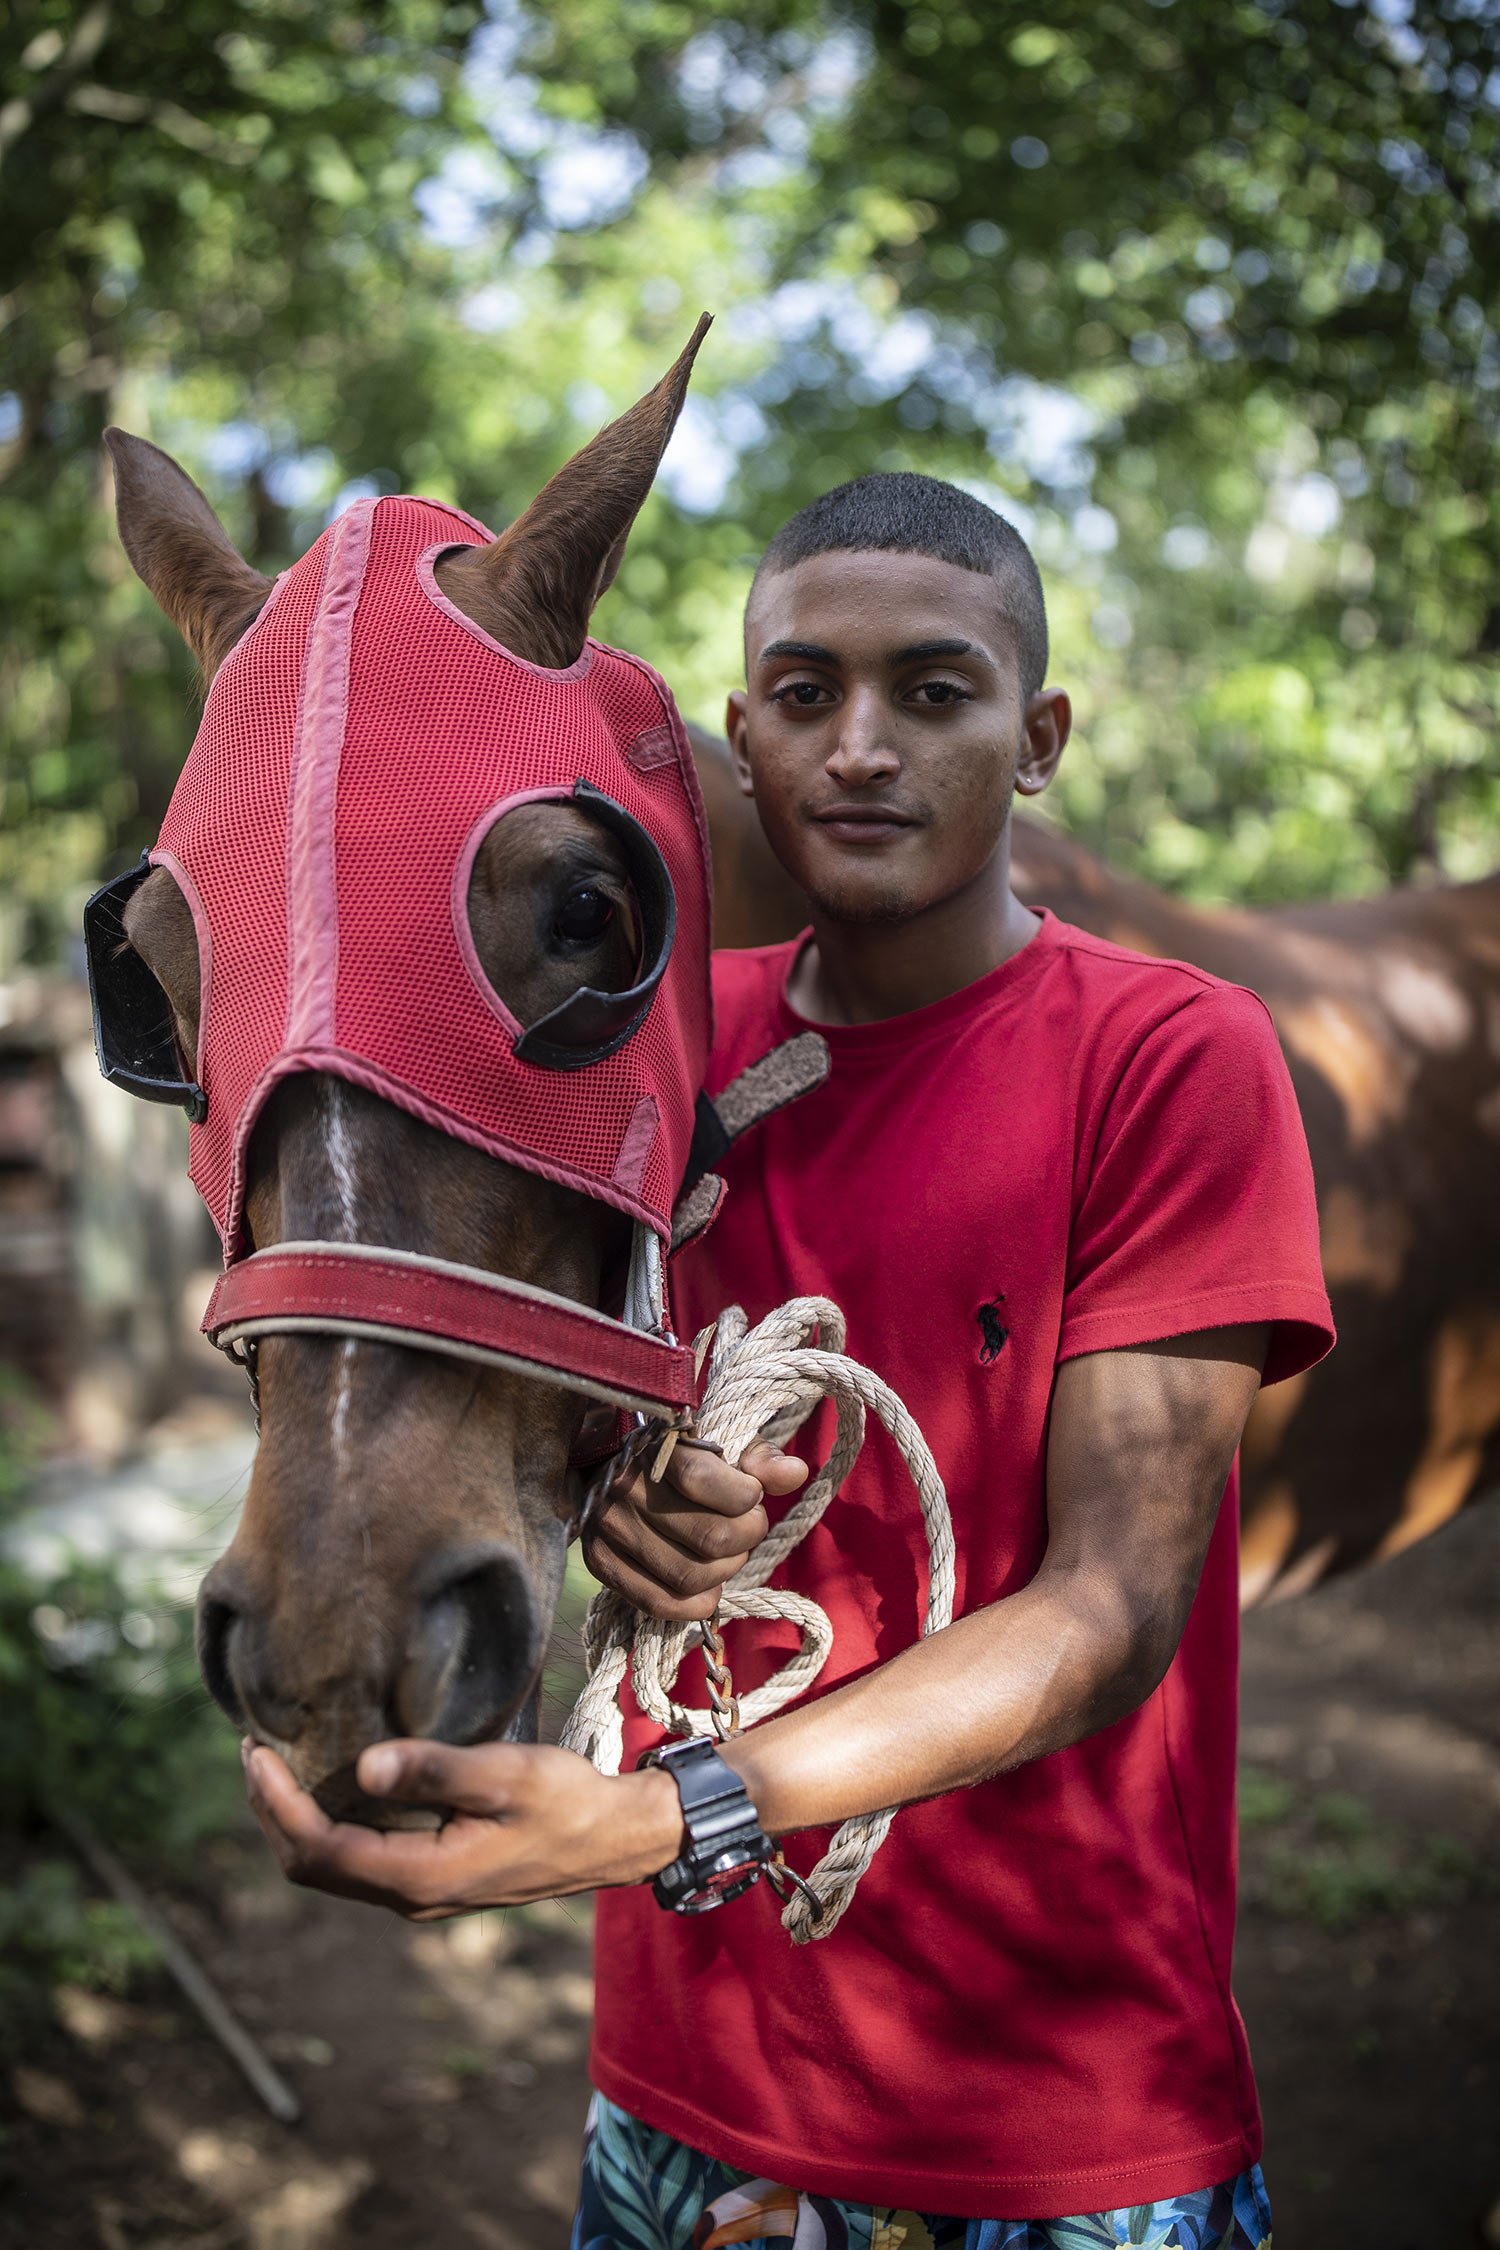  Jockey Derwin Botero poses with his racehorse Time Will Tell on San Andres Island in Colombia, Thursday, Nov. 10, 2022. (AP Photo/Ivan Valencia) 